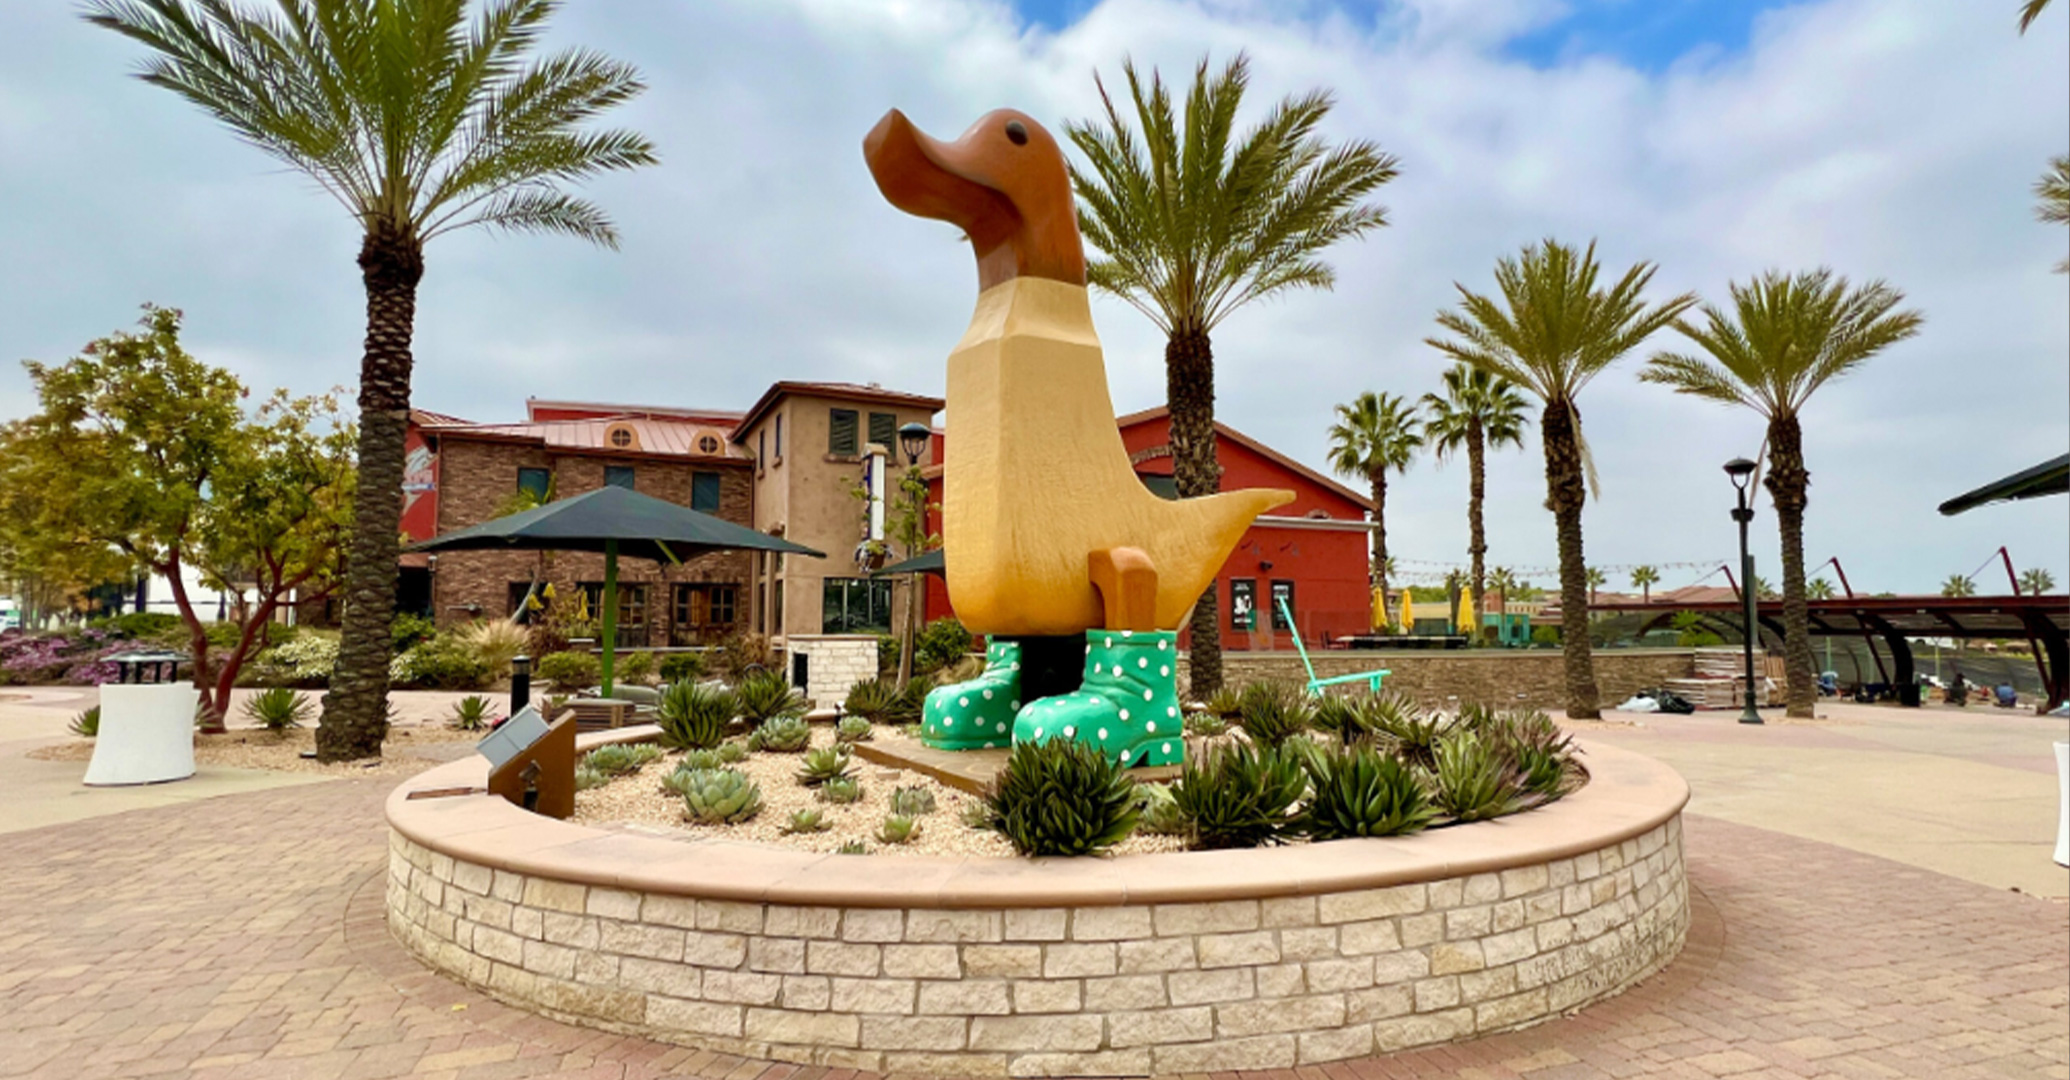 The World’s Largest Talking Duck Just Landed in Corona, California at The Shop at Dos Lagos